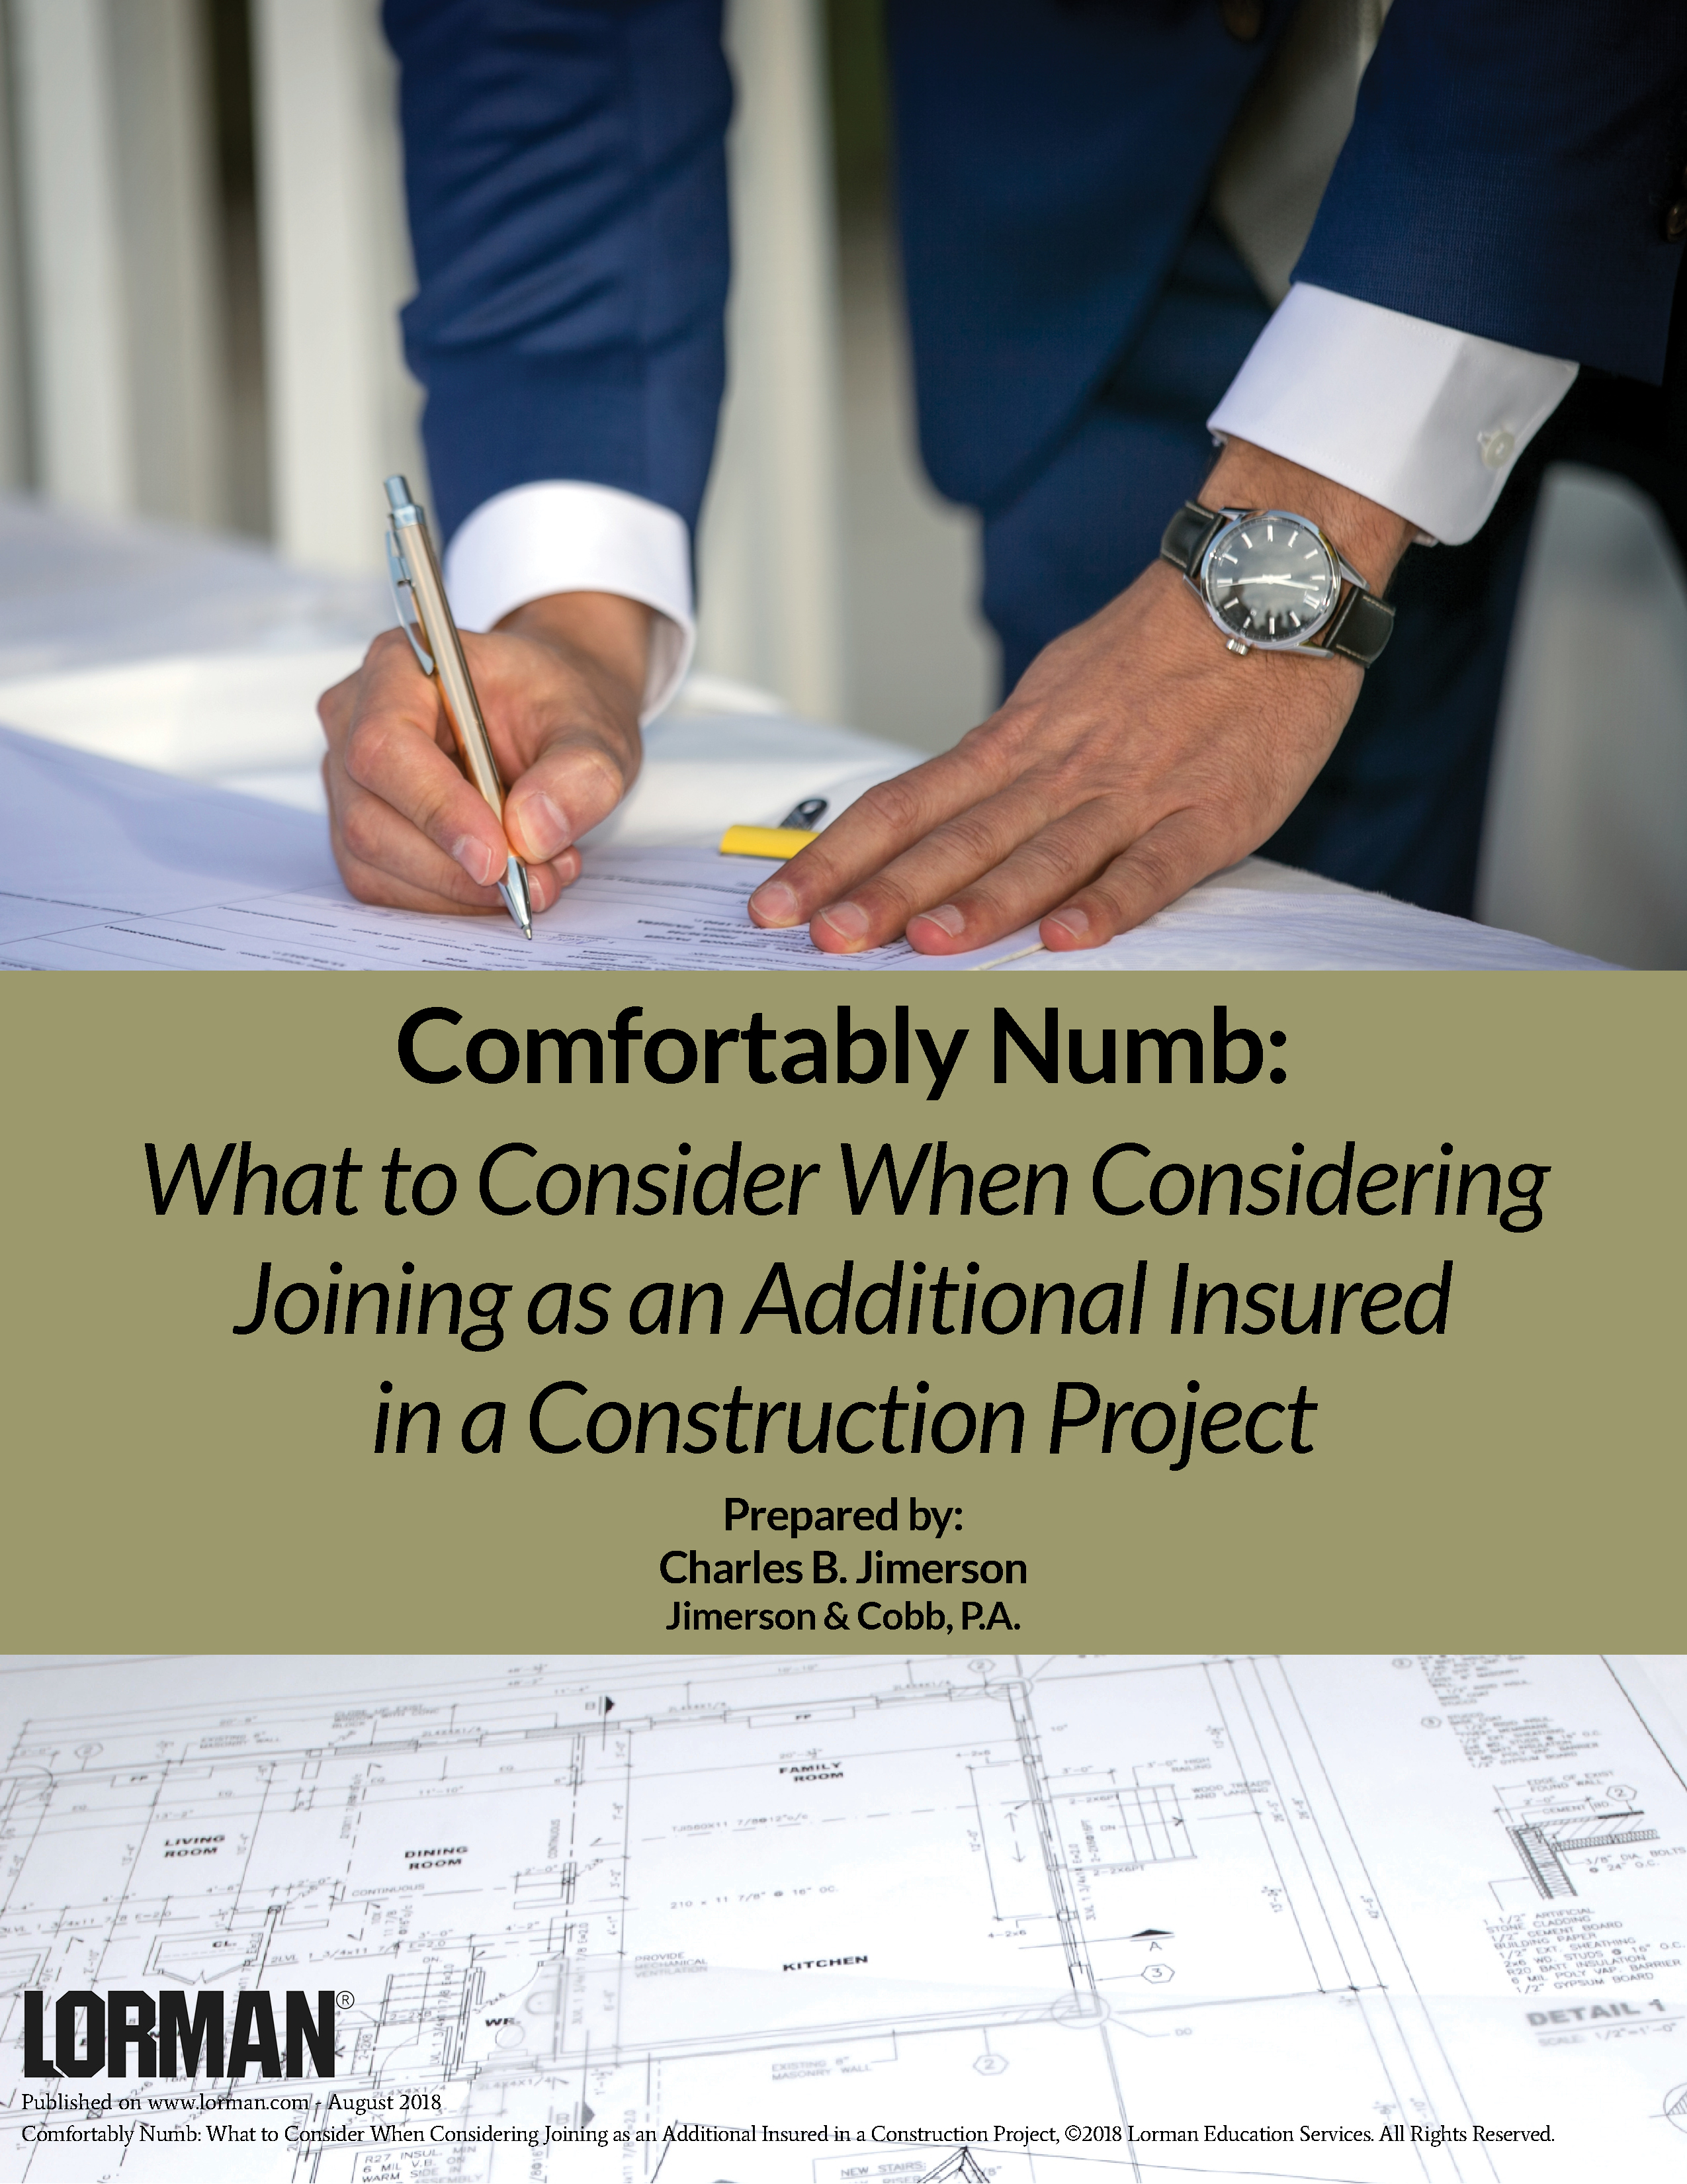 What to Consider When Considering Joining as an Additional Insured in a Construction Project